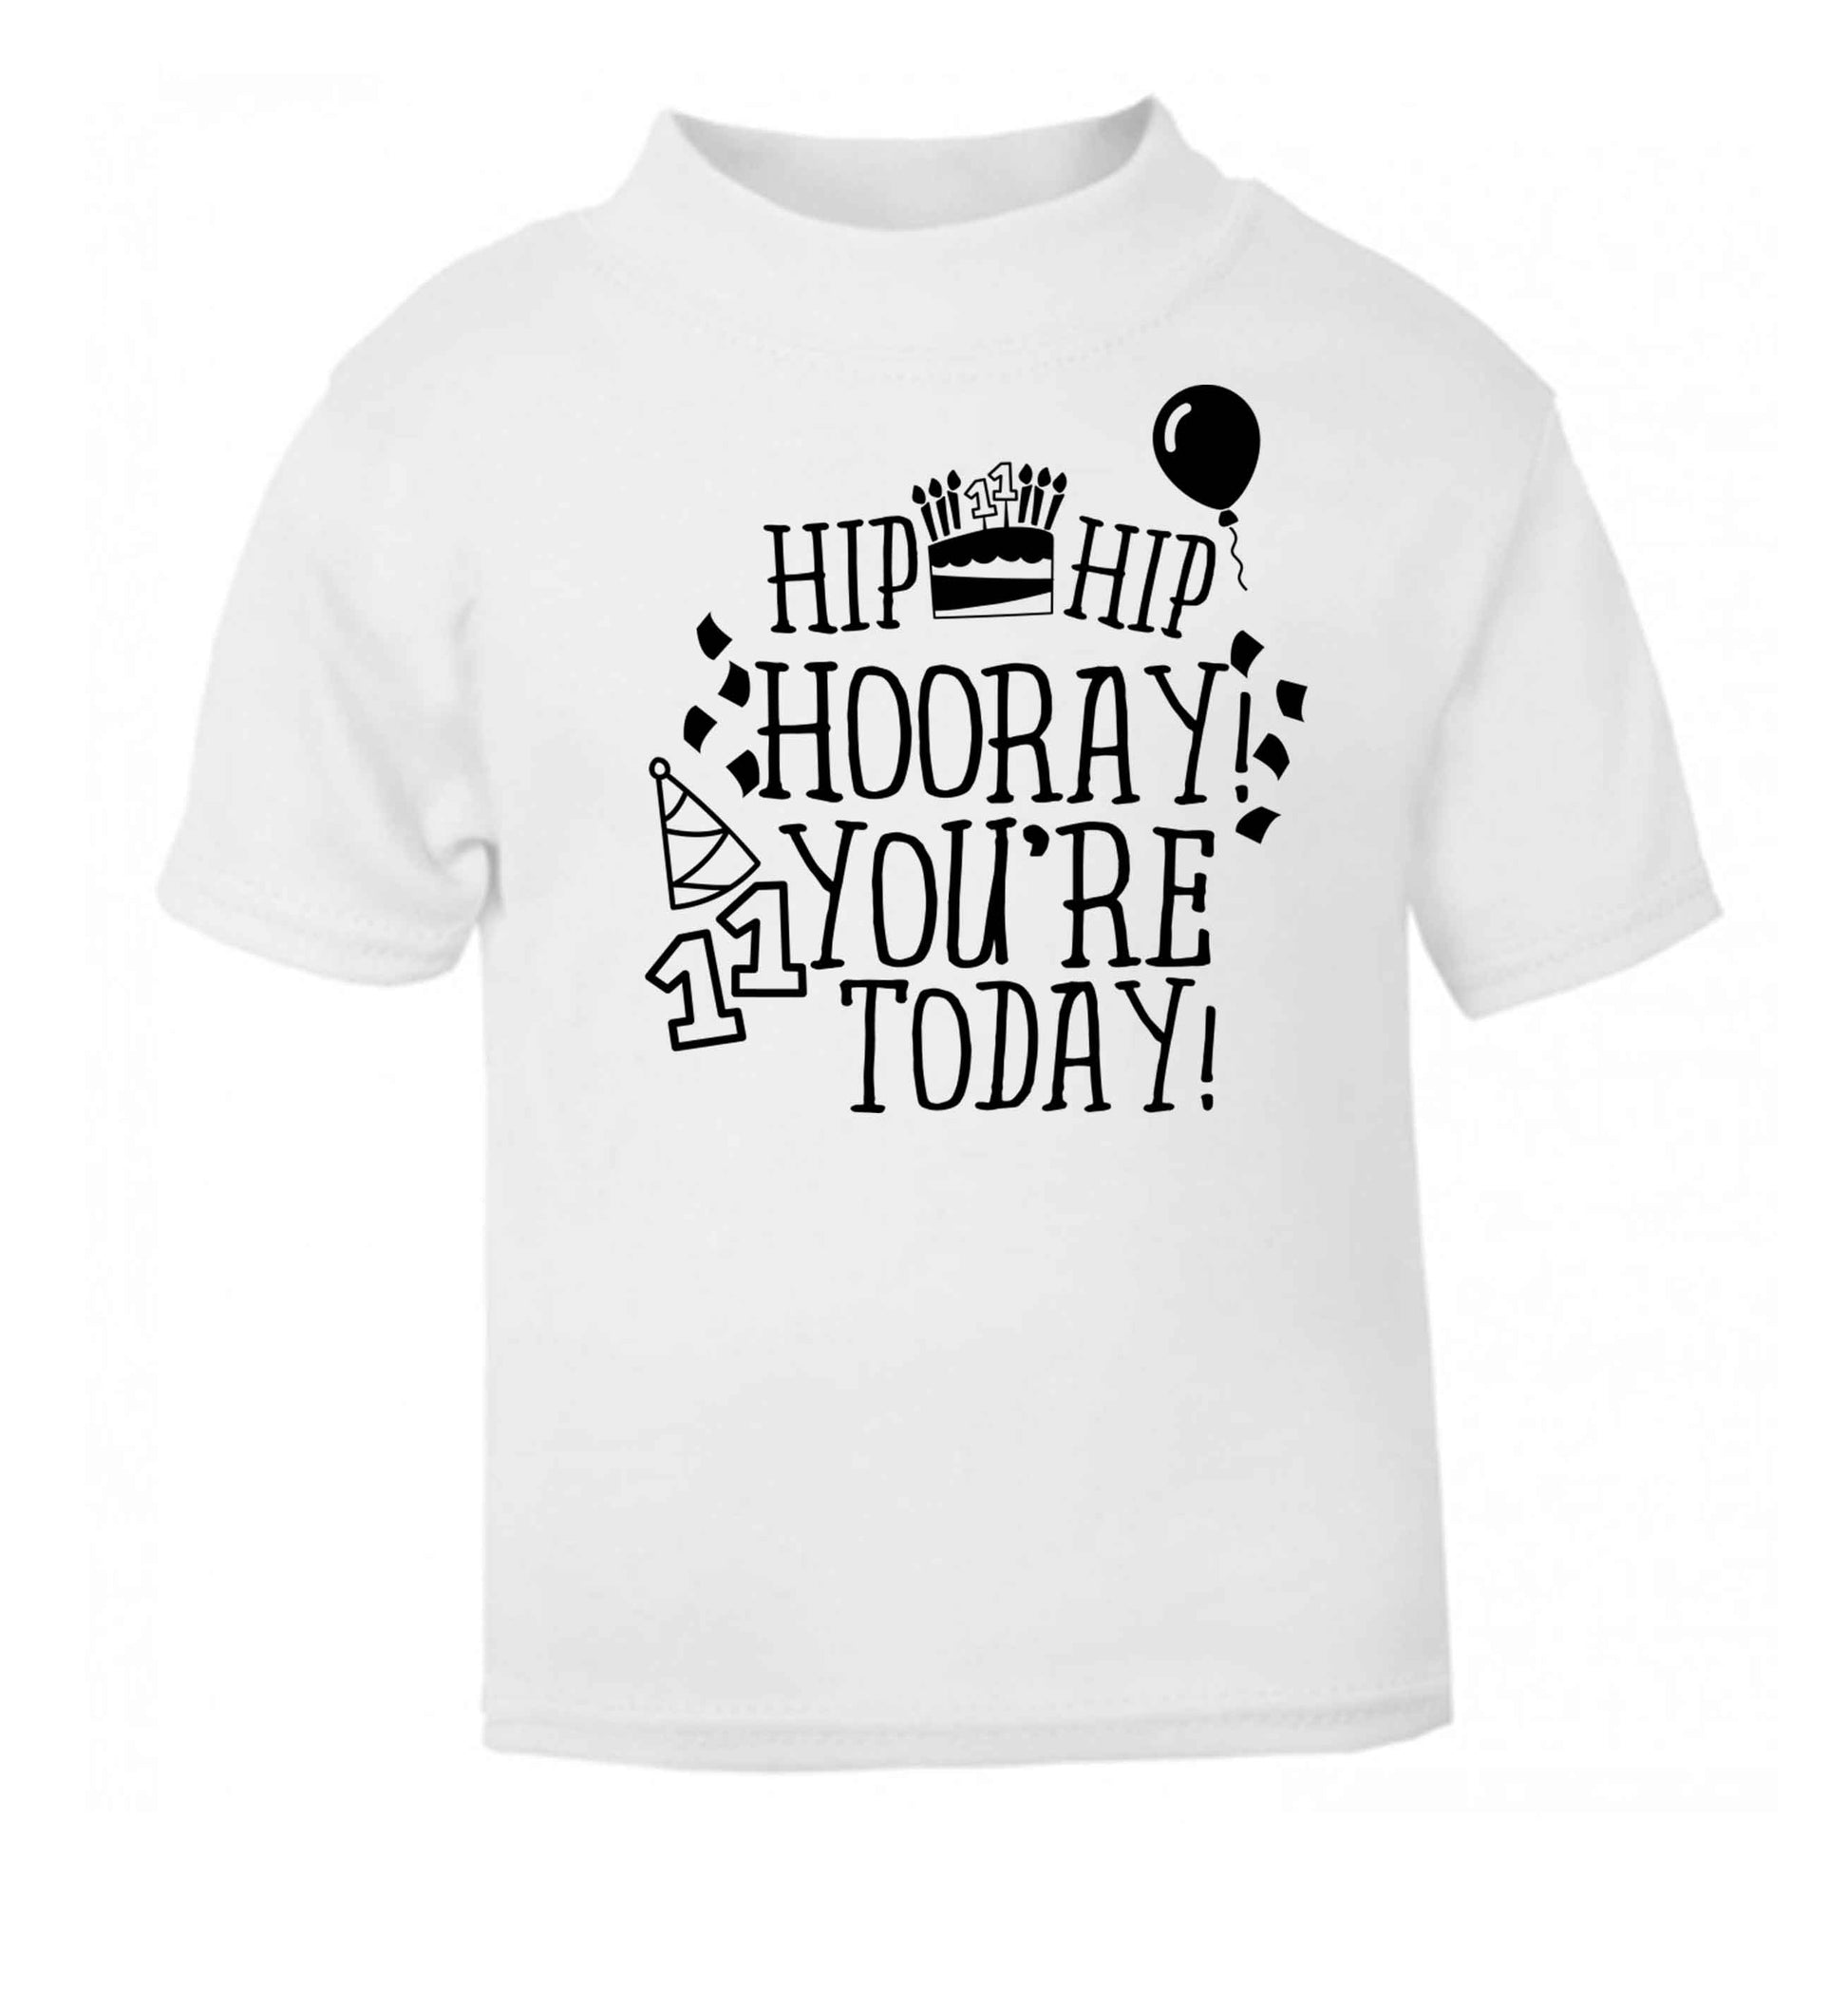 Hip hip hooray I you're eleven today! white baby toddler Tshirt 2 Years